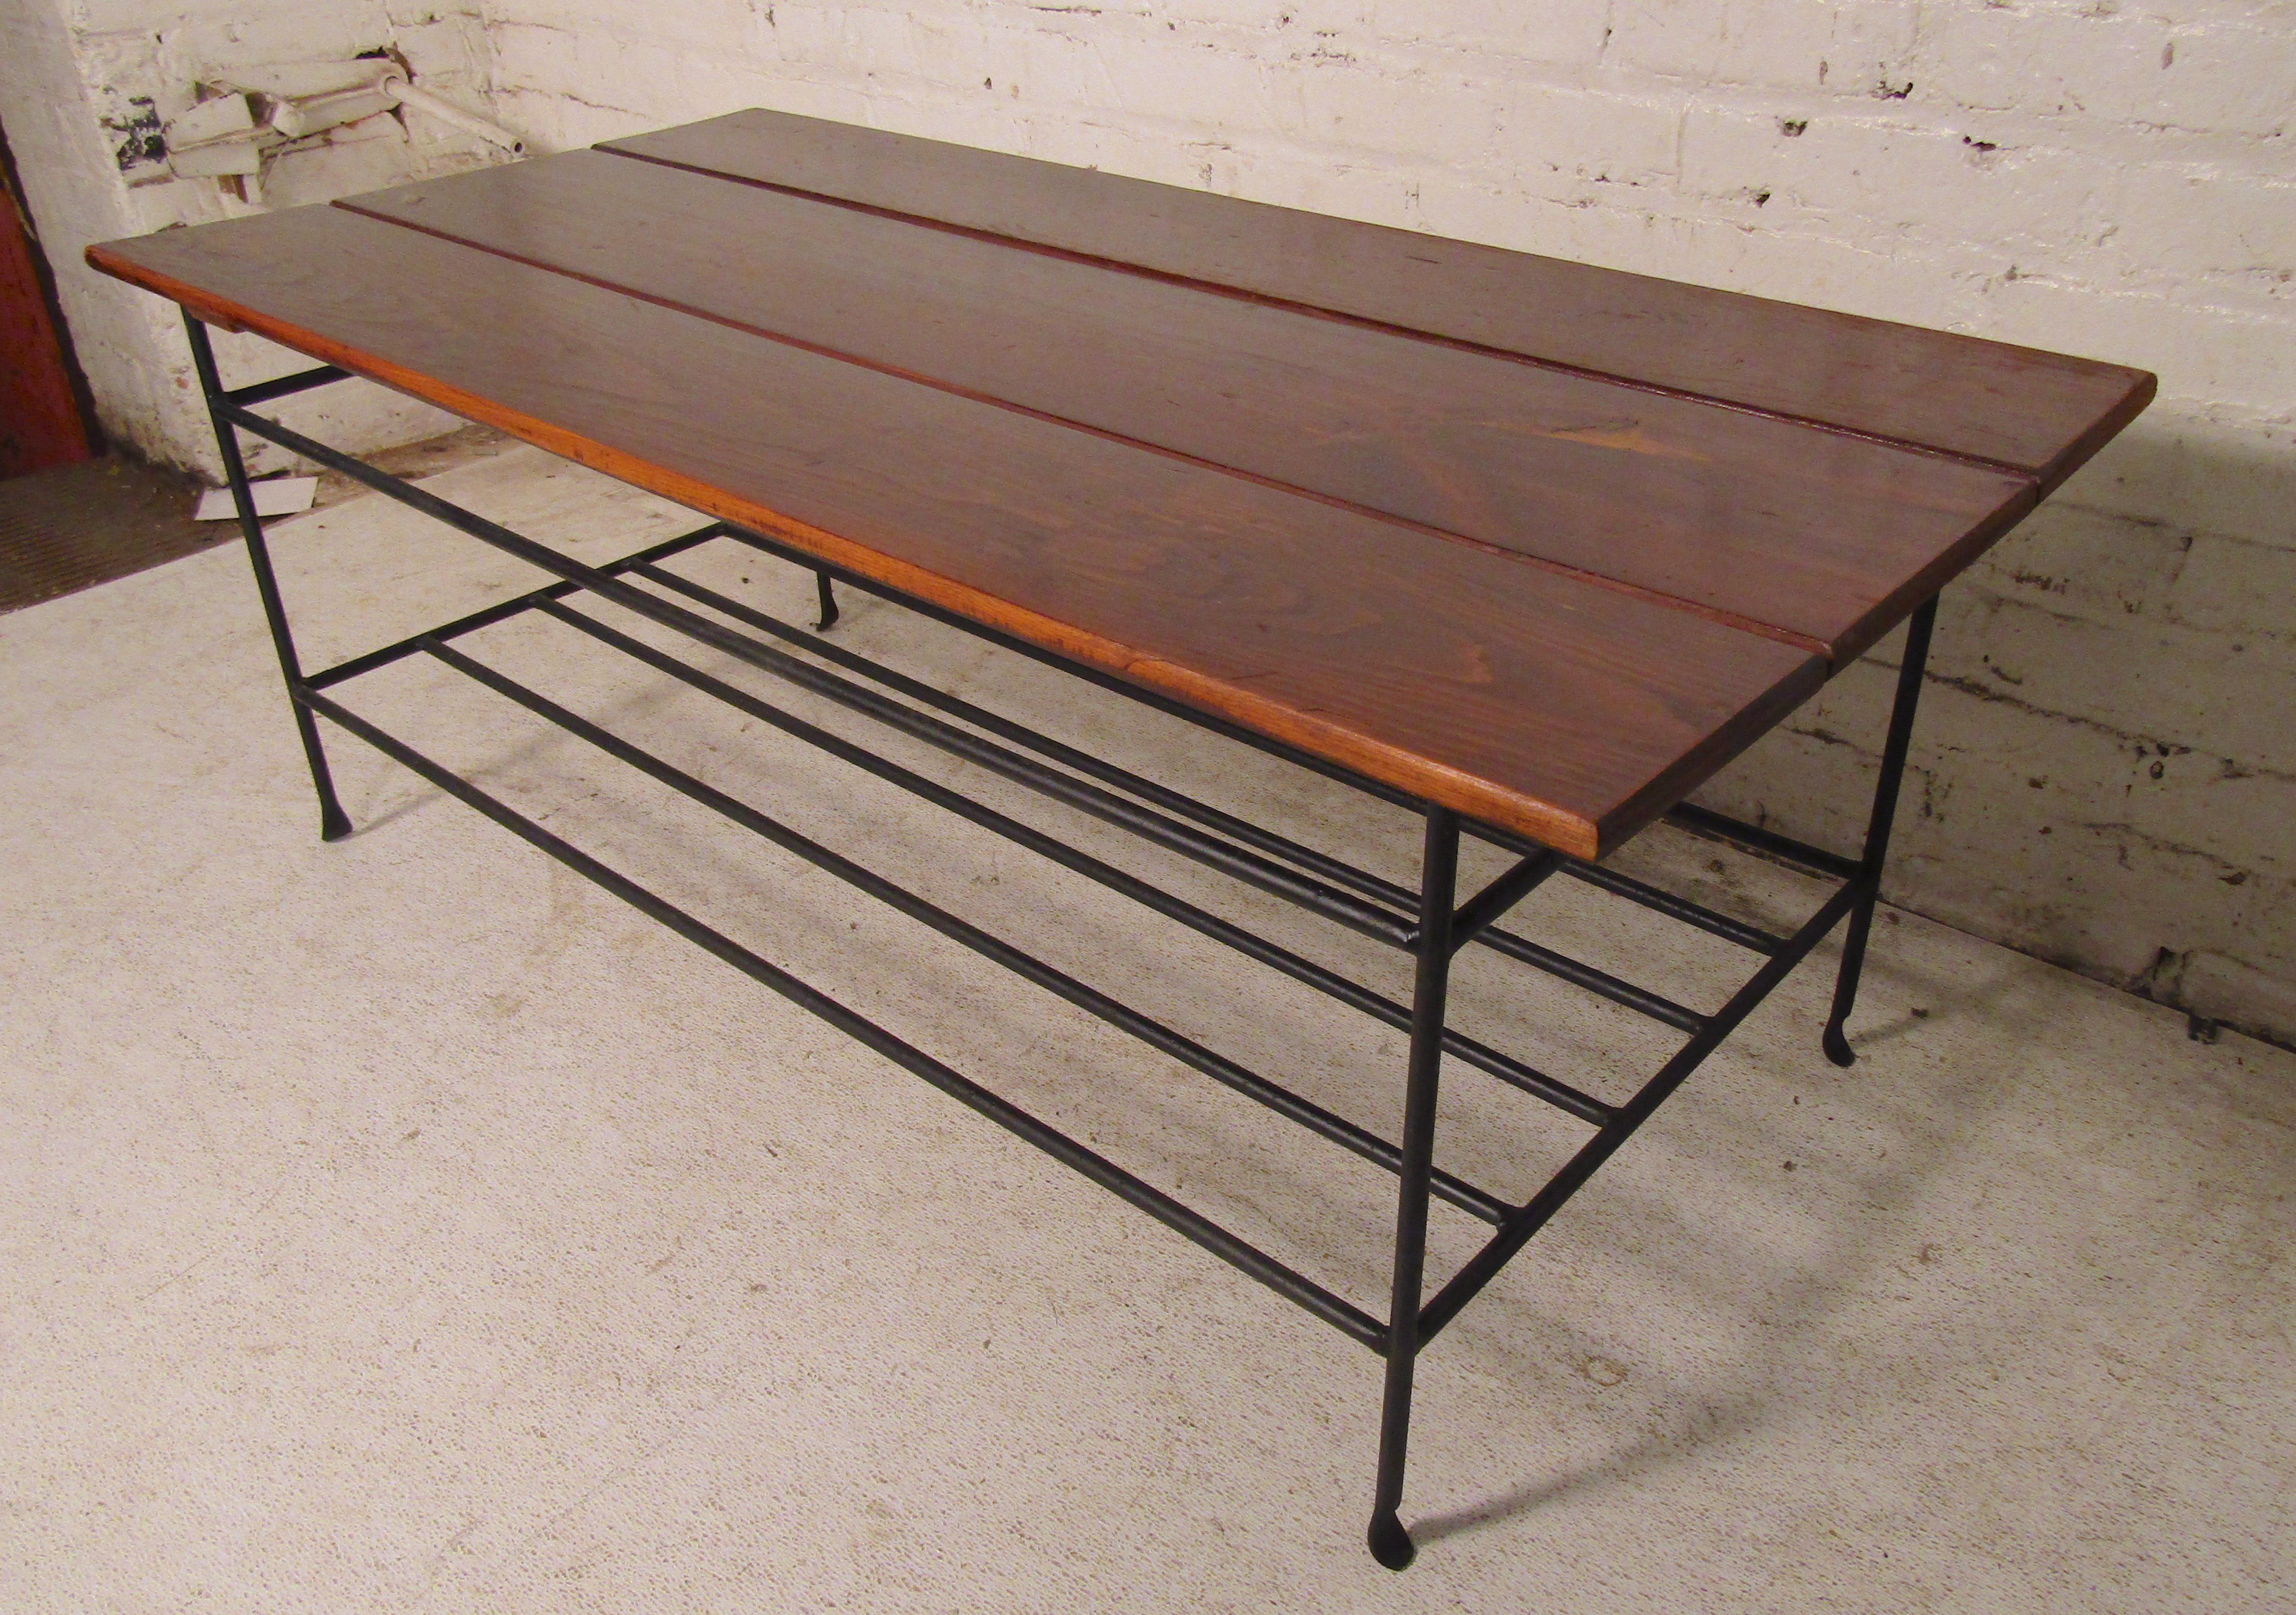 Vintage slat table with wrought iron frame and magazine shelf.
(Please confirm item location - NY or NJ - with dealer).
   